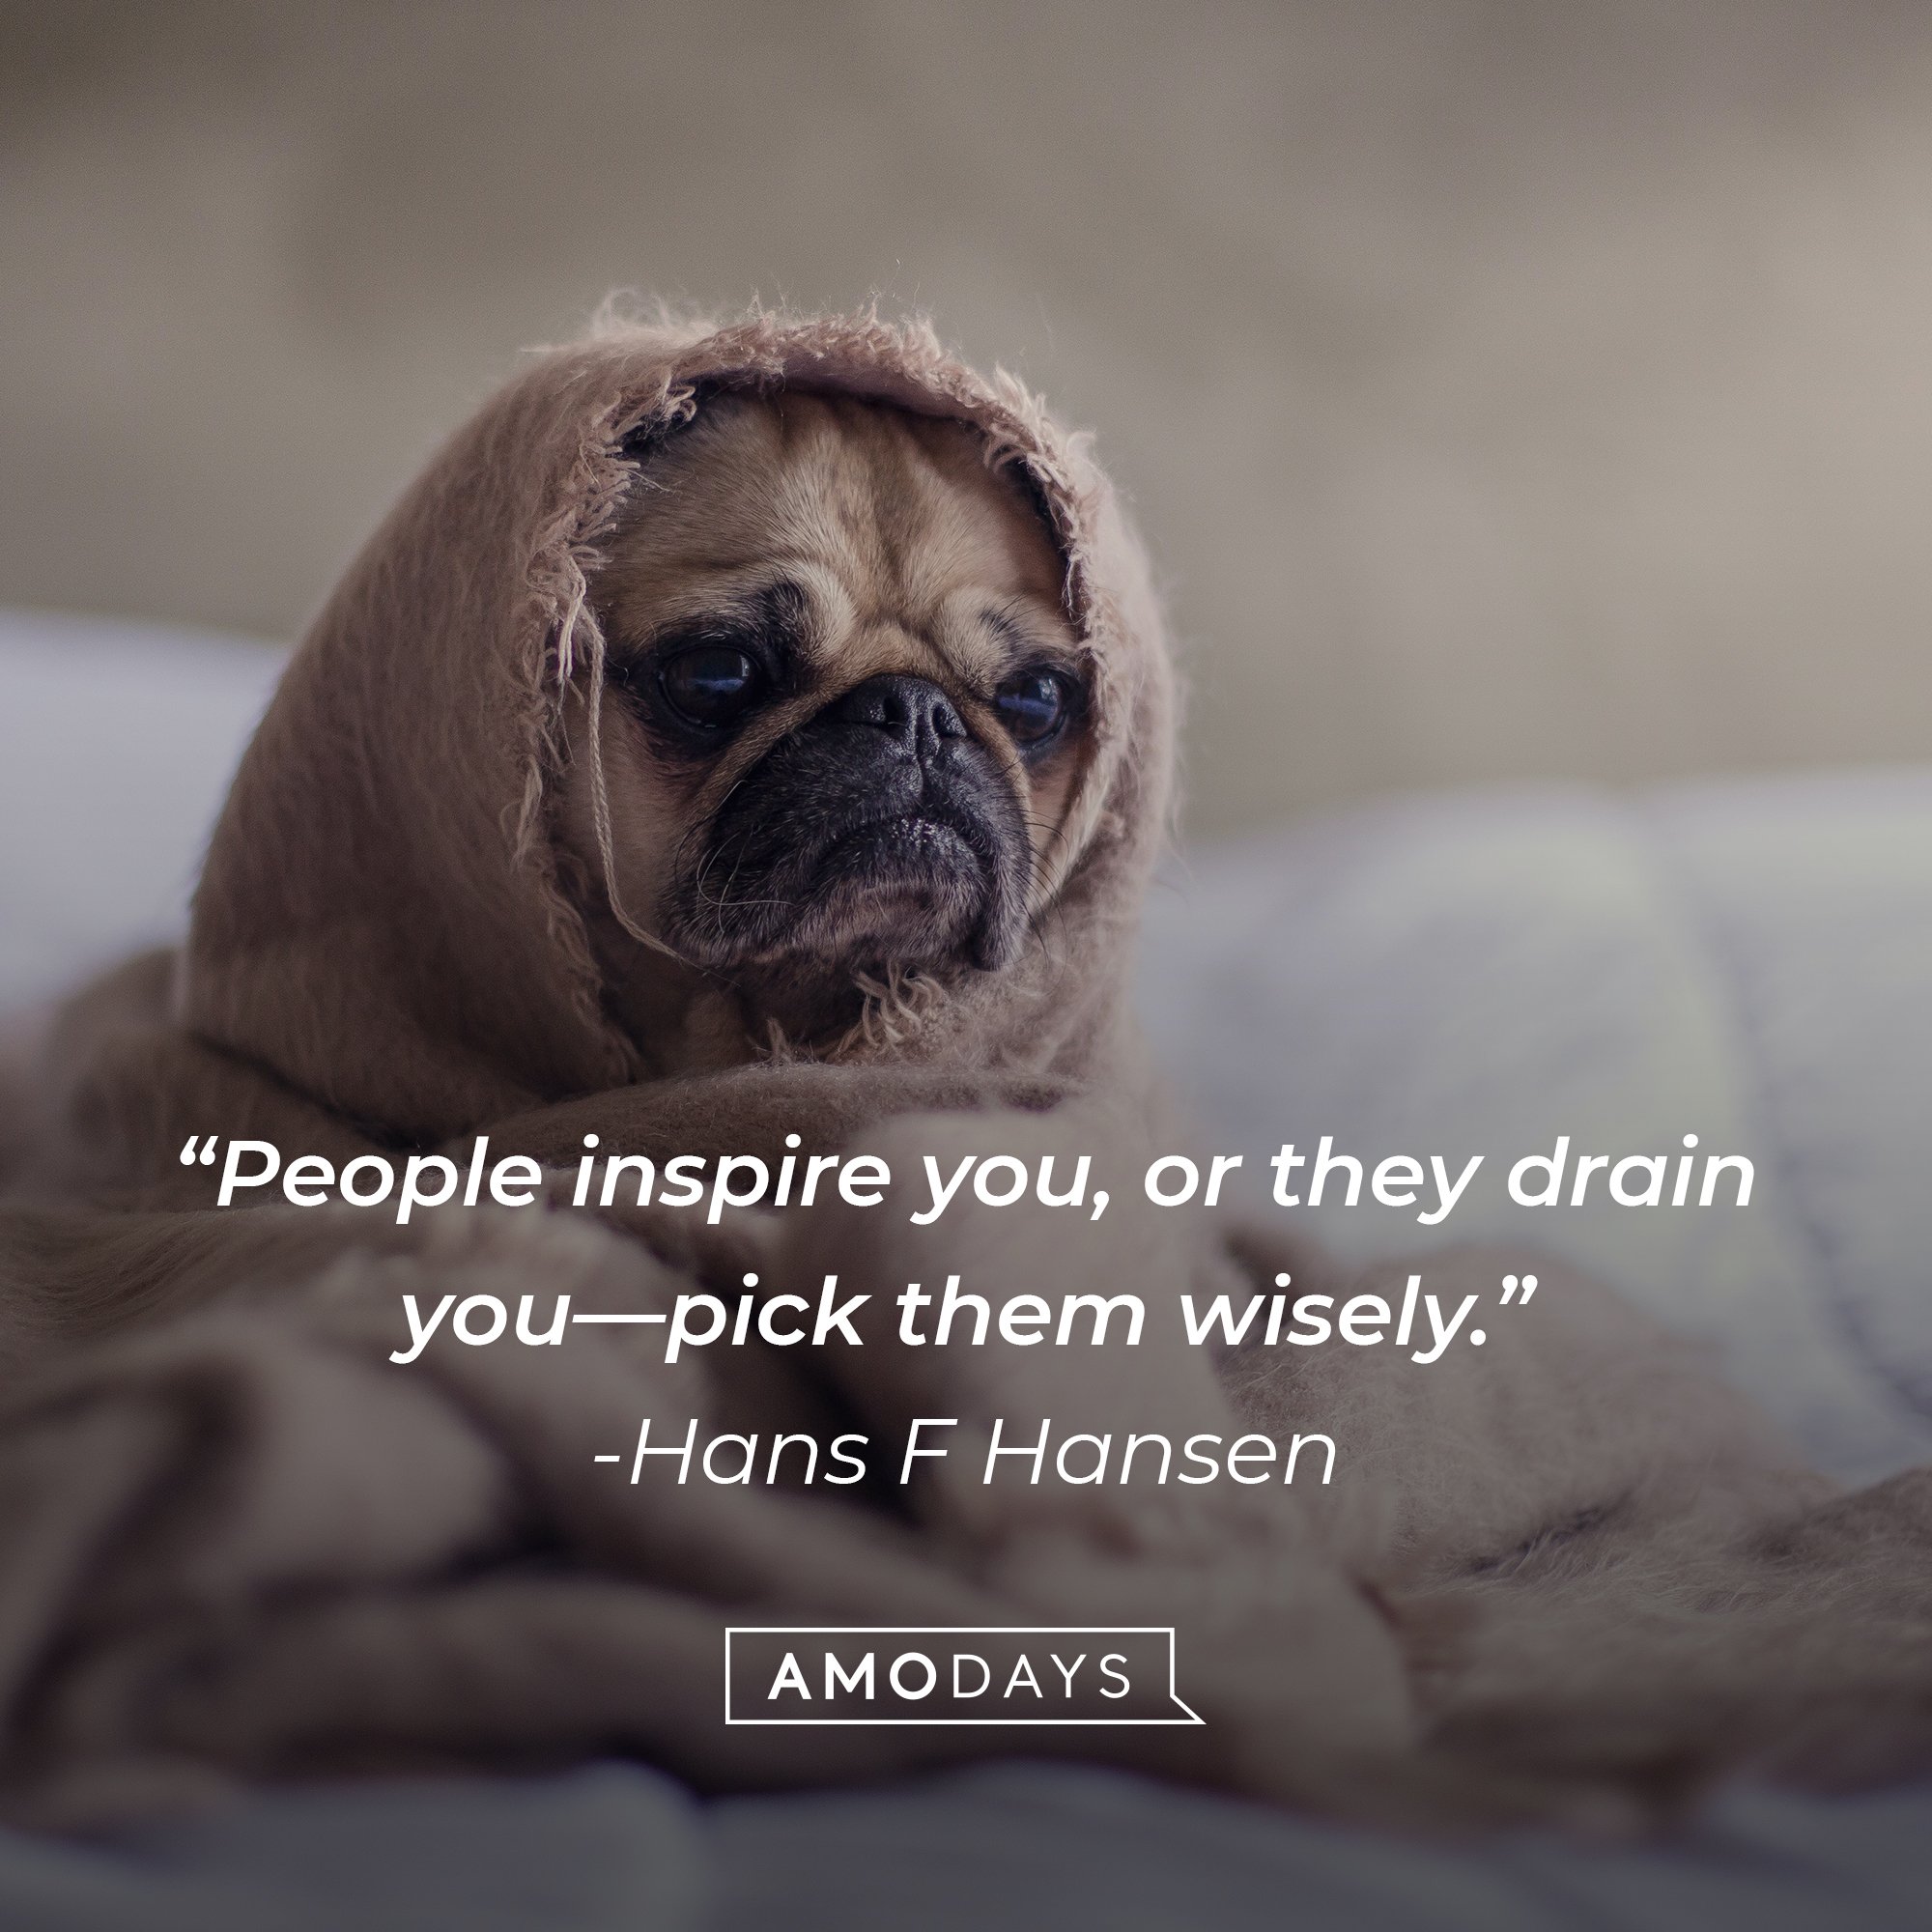  Hans F Hansen’s quote: "People inspire you, or they drain you—pick them wisely." | Image: AmoDays